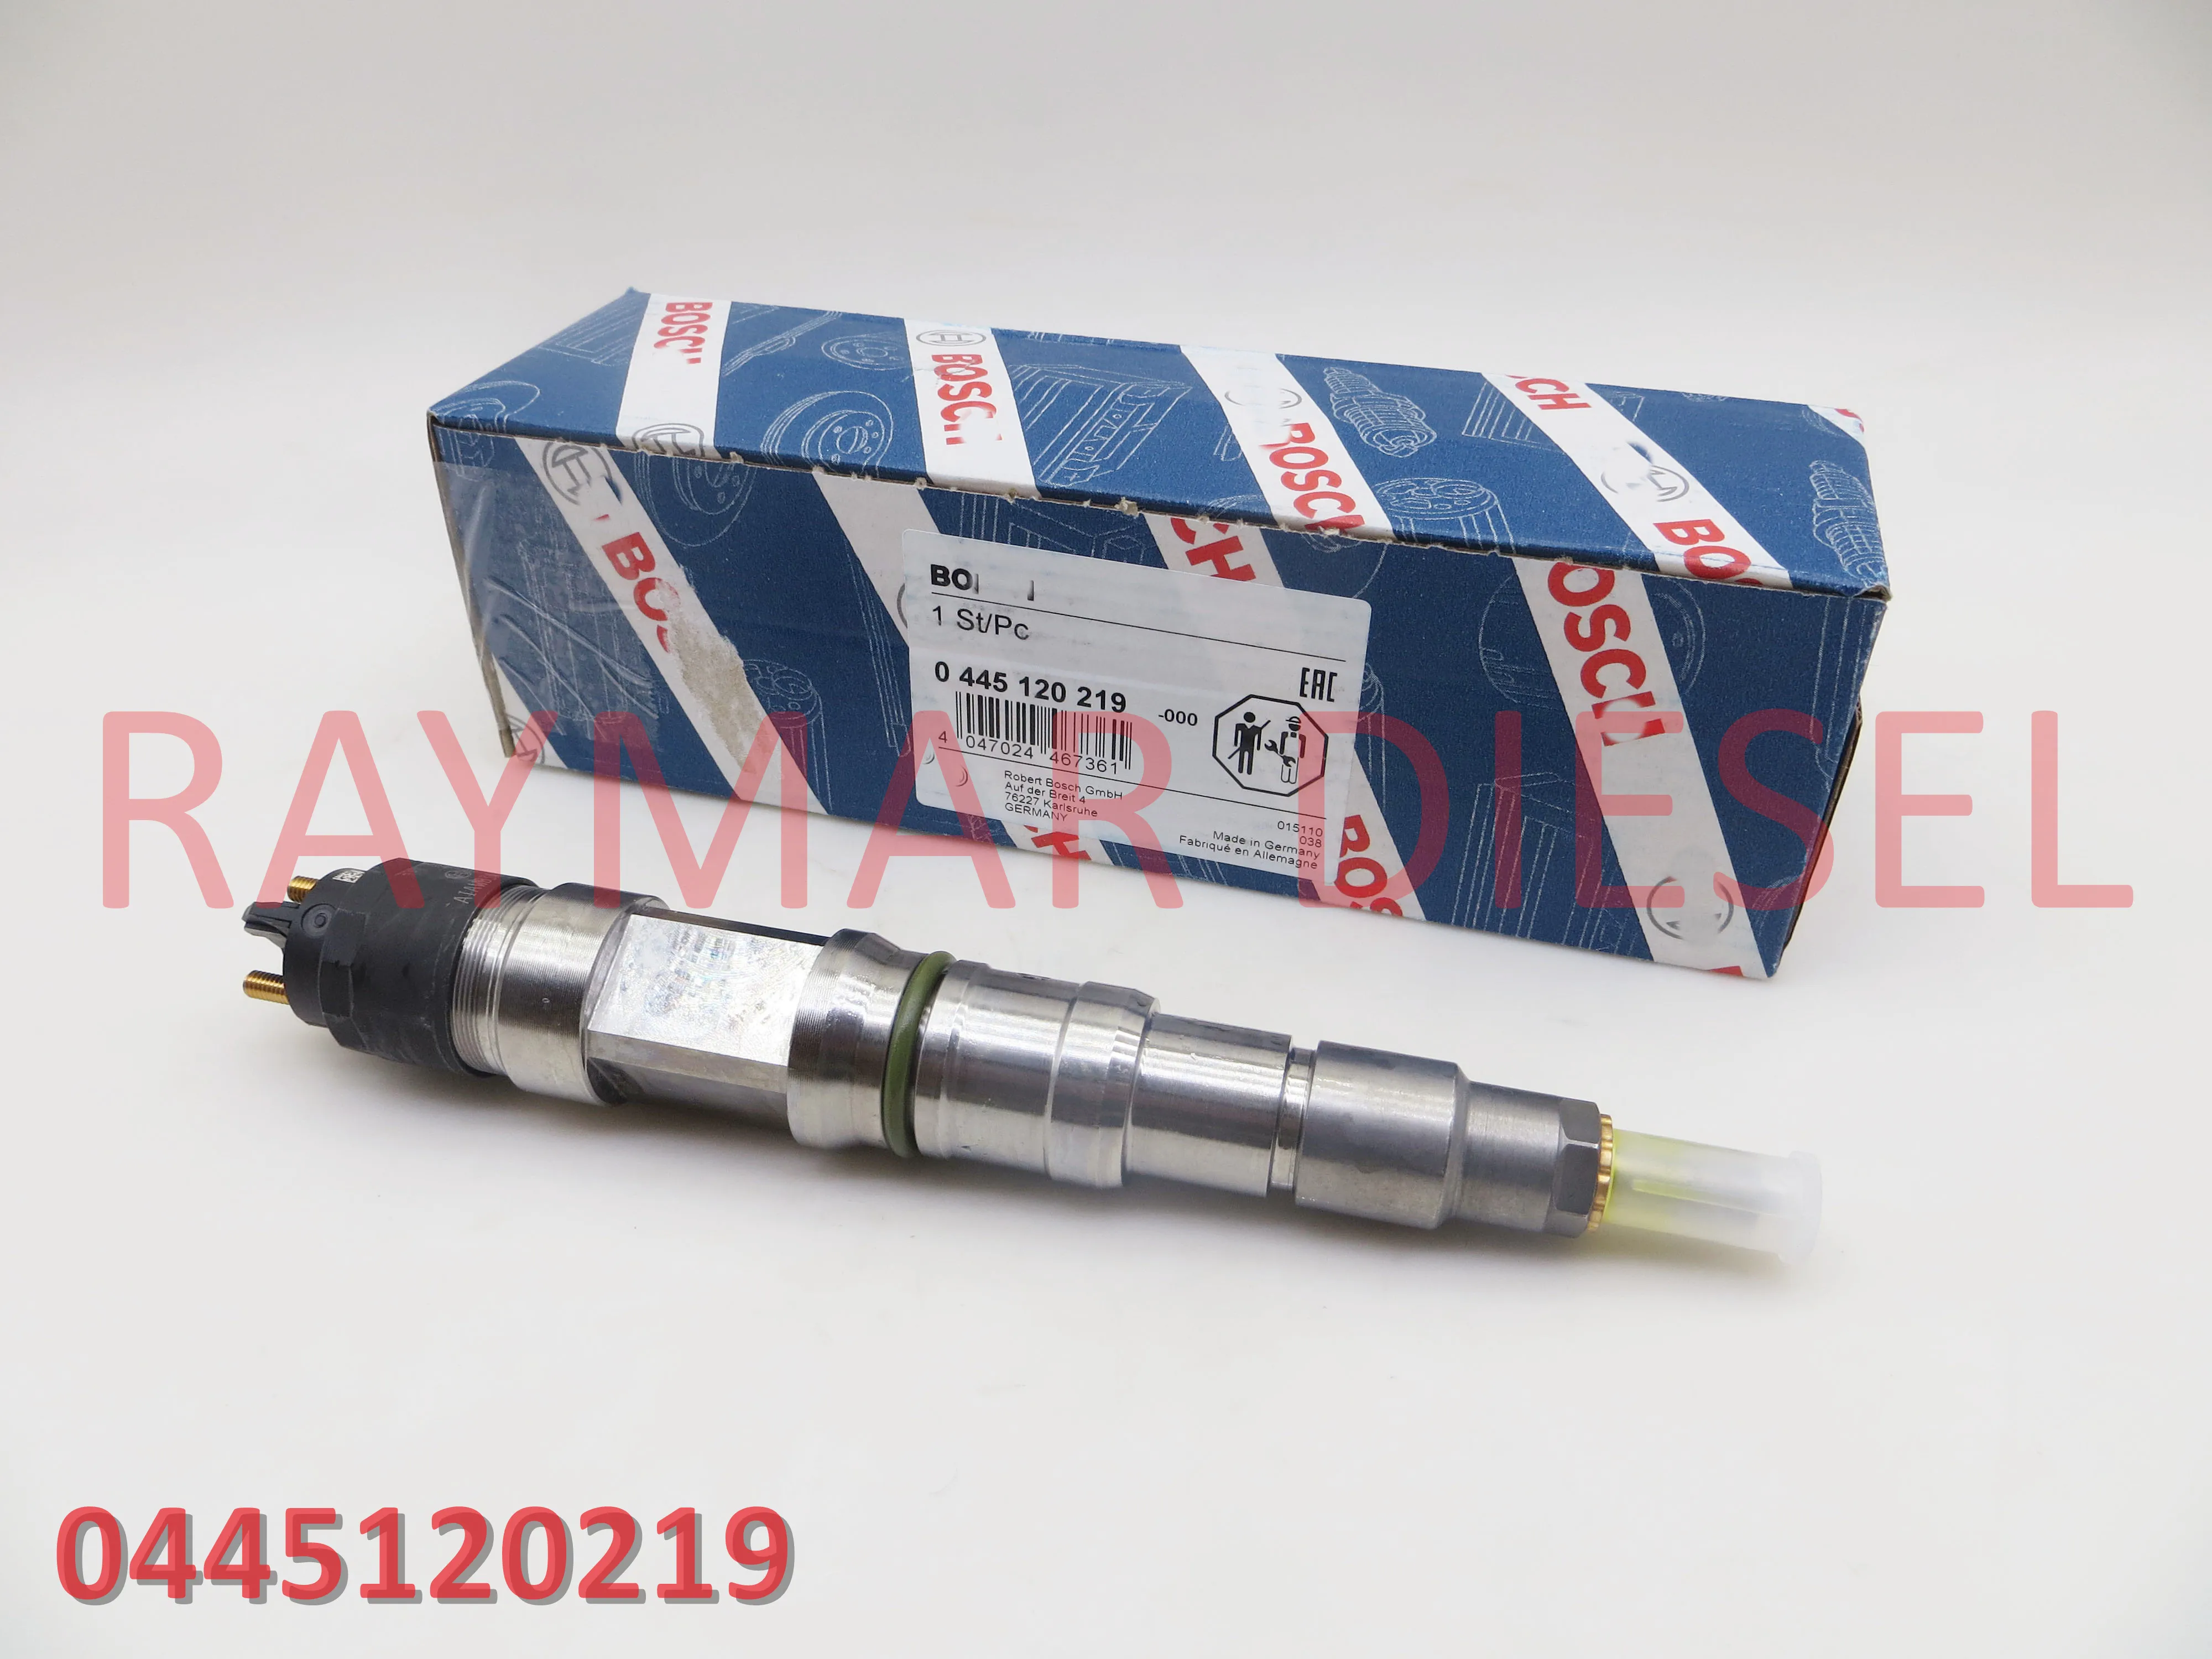 

Genuine Brand Diesel Common rail fuel injector 0445120219, 0445120100, 0445120275 for MAN 51101006127